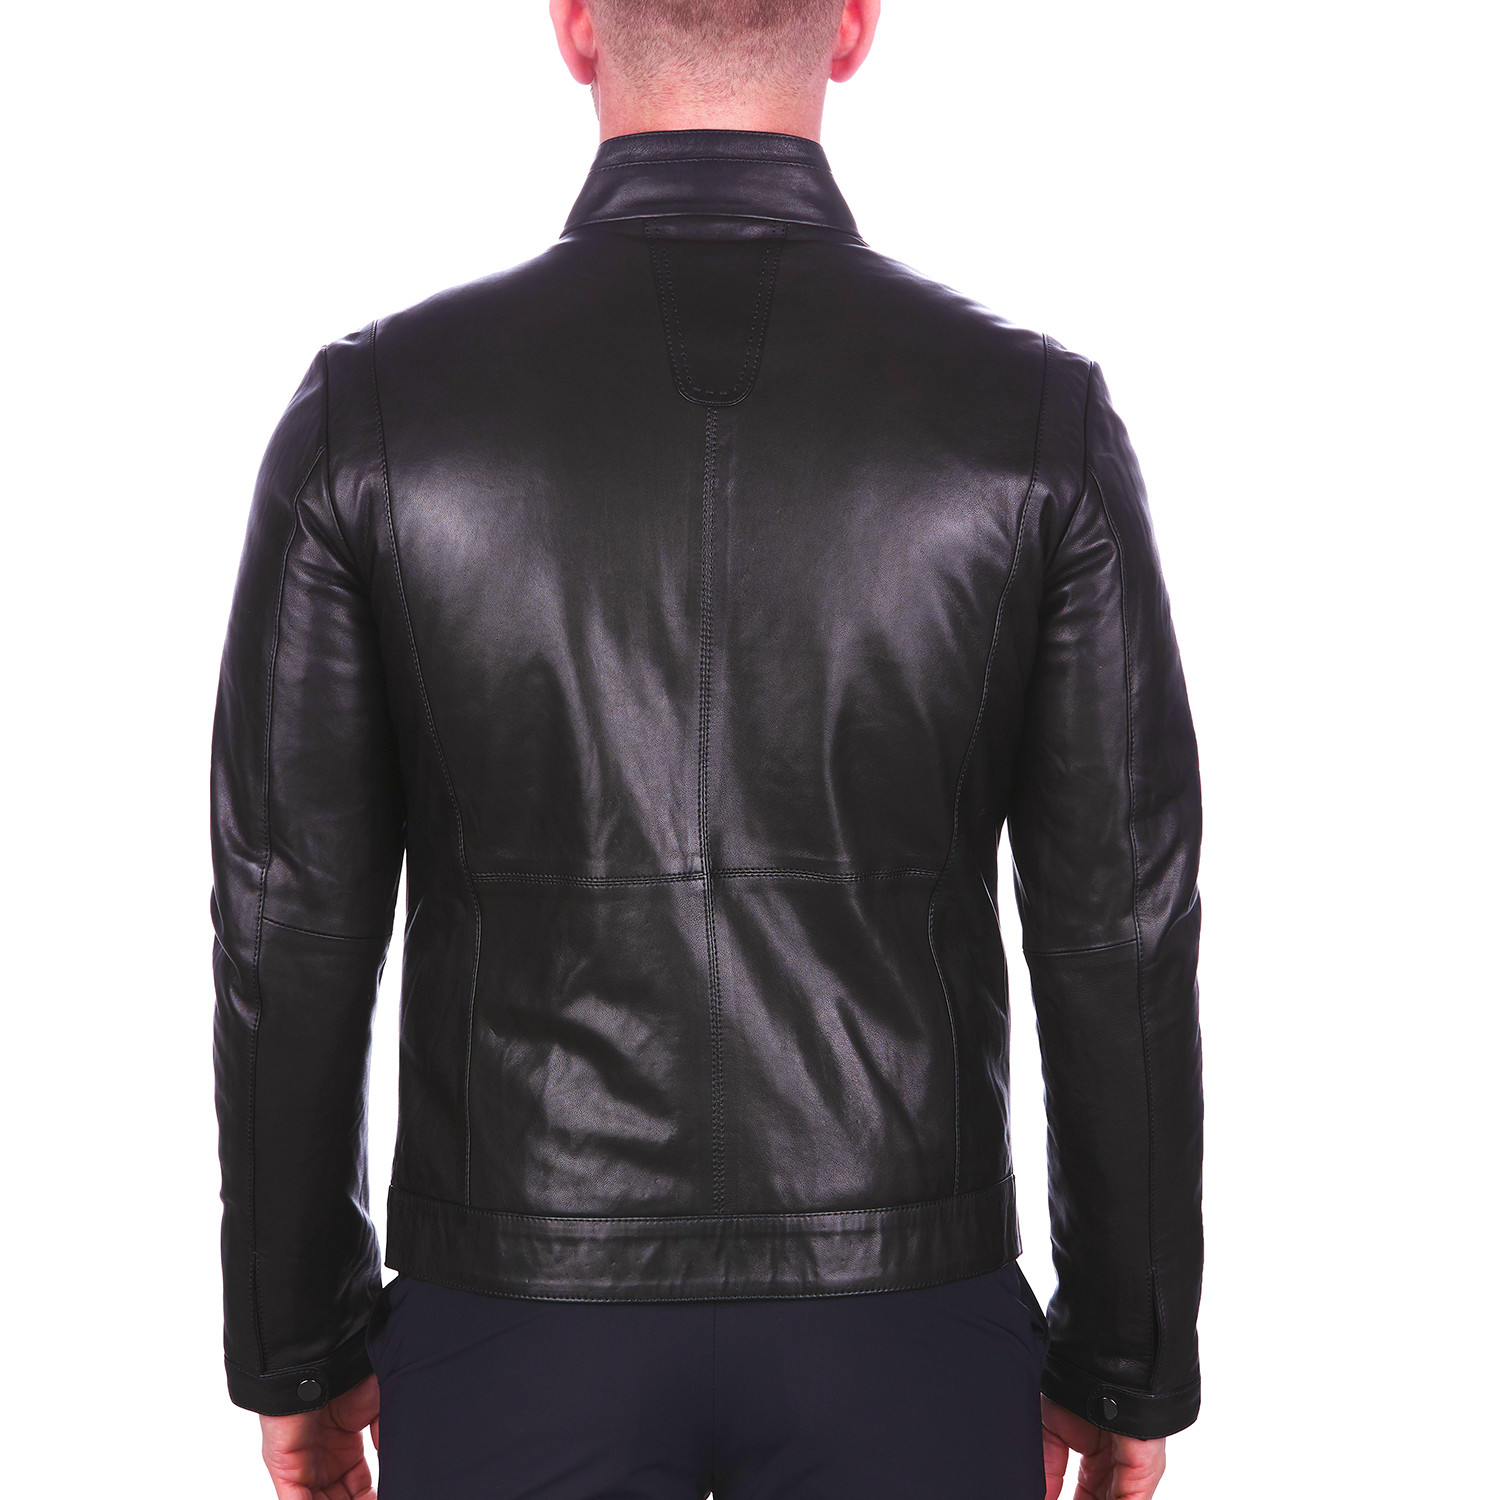 Multi-Zip Leather Jacket // Black (2XL) - Maceoo - Touch of Modern